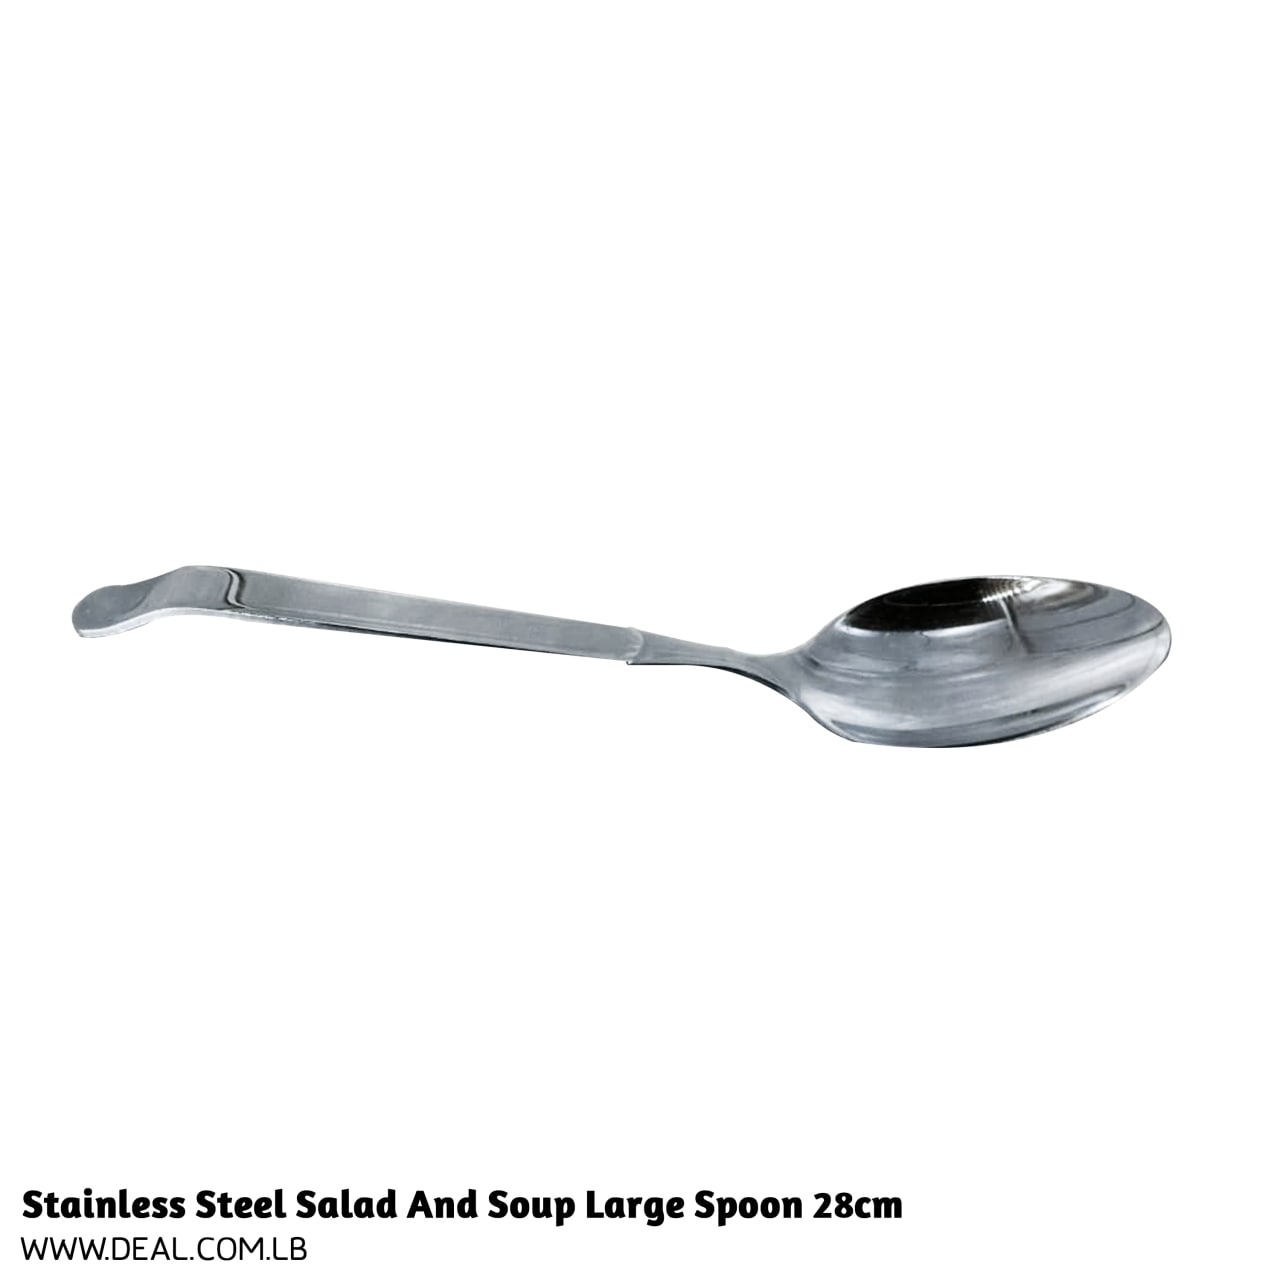 Stainless Steel Salad And Soup Large Spoon 28cm